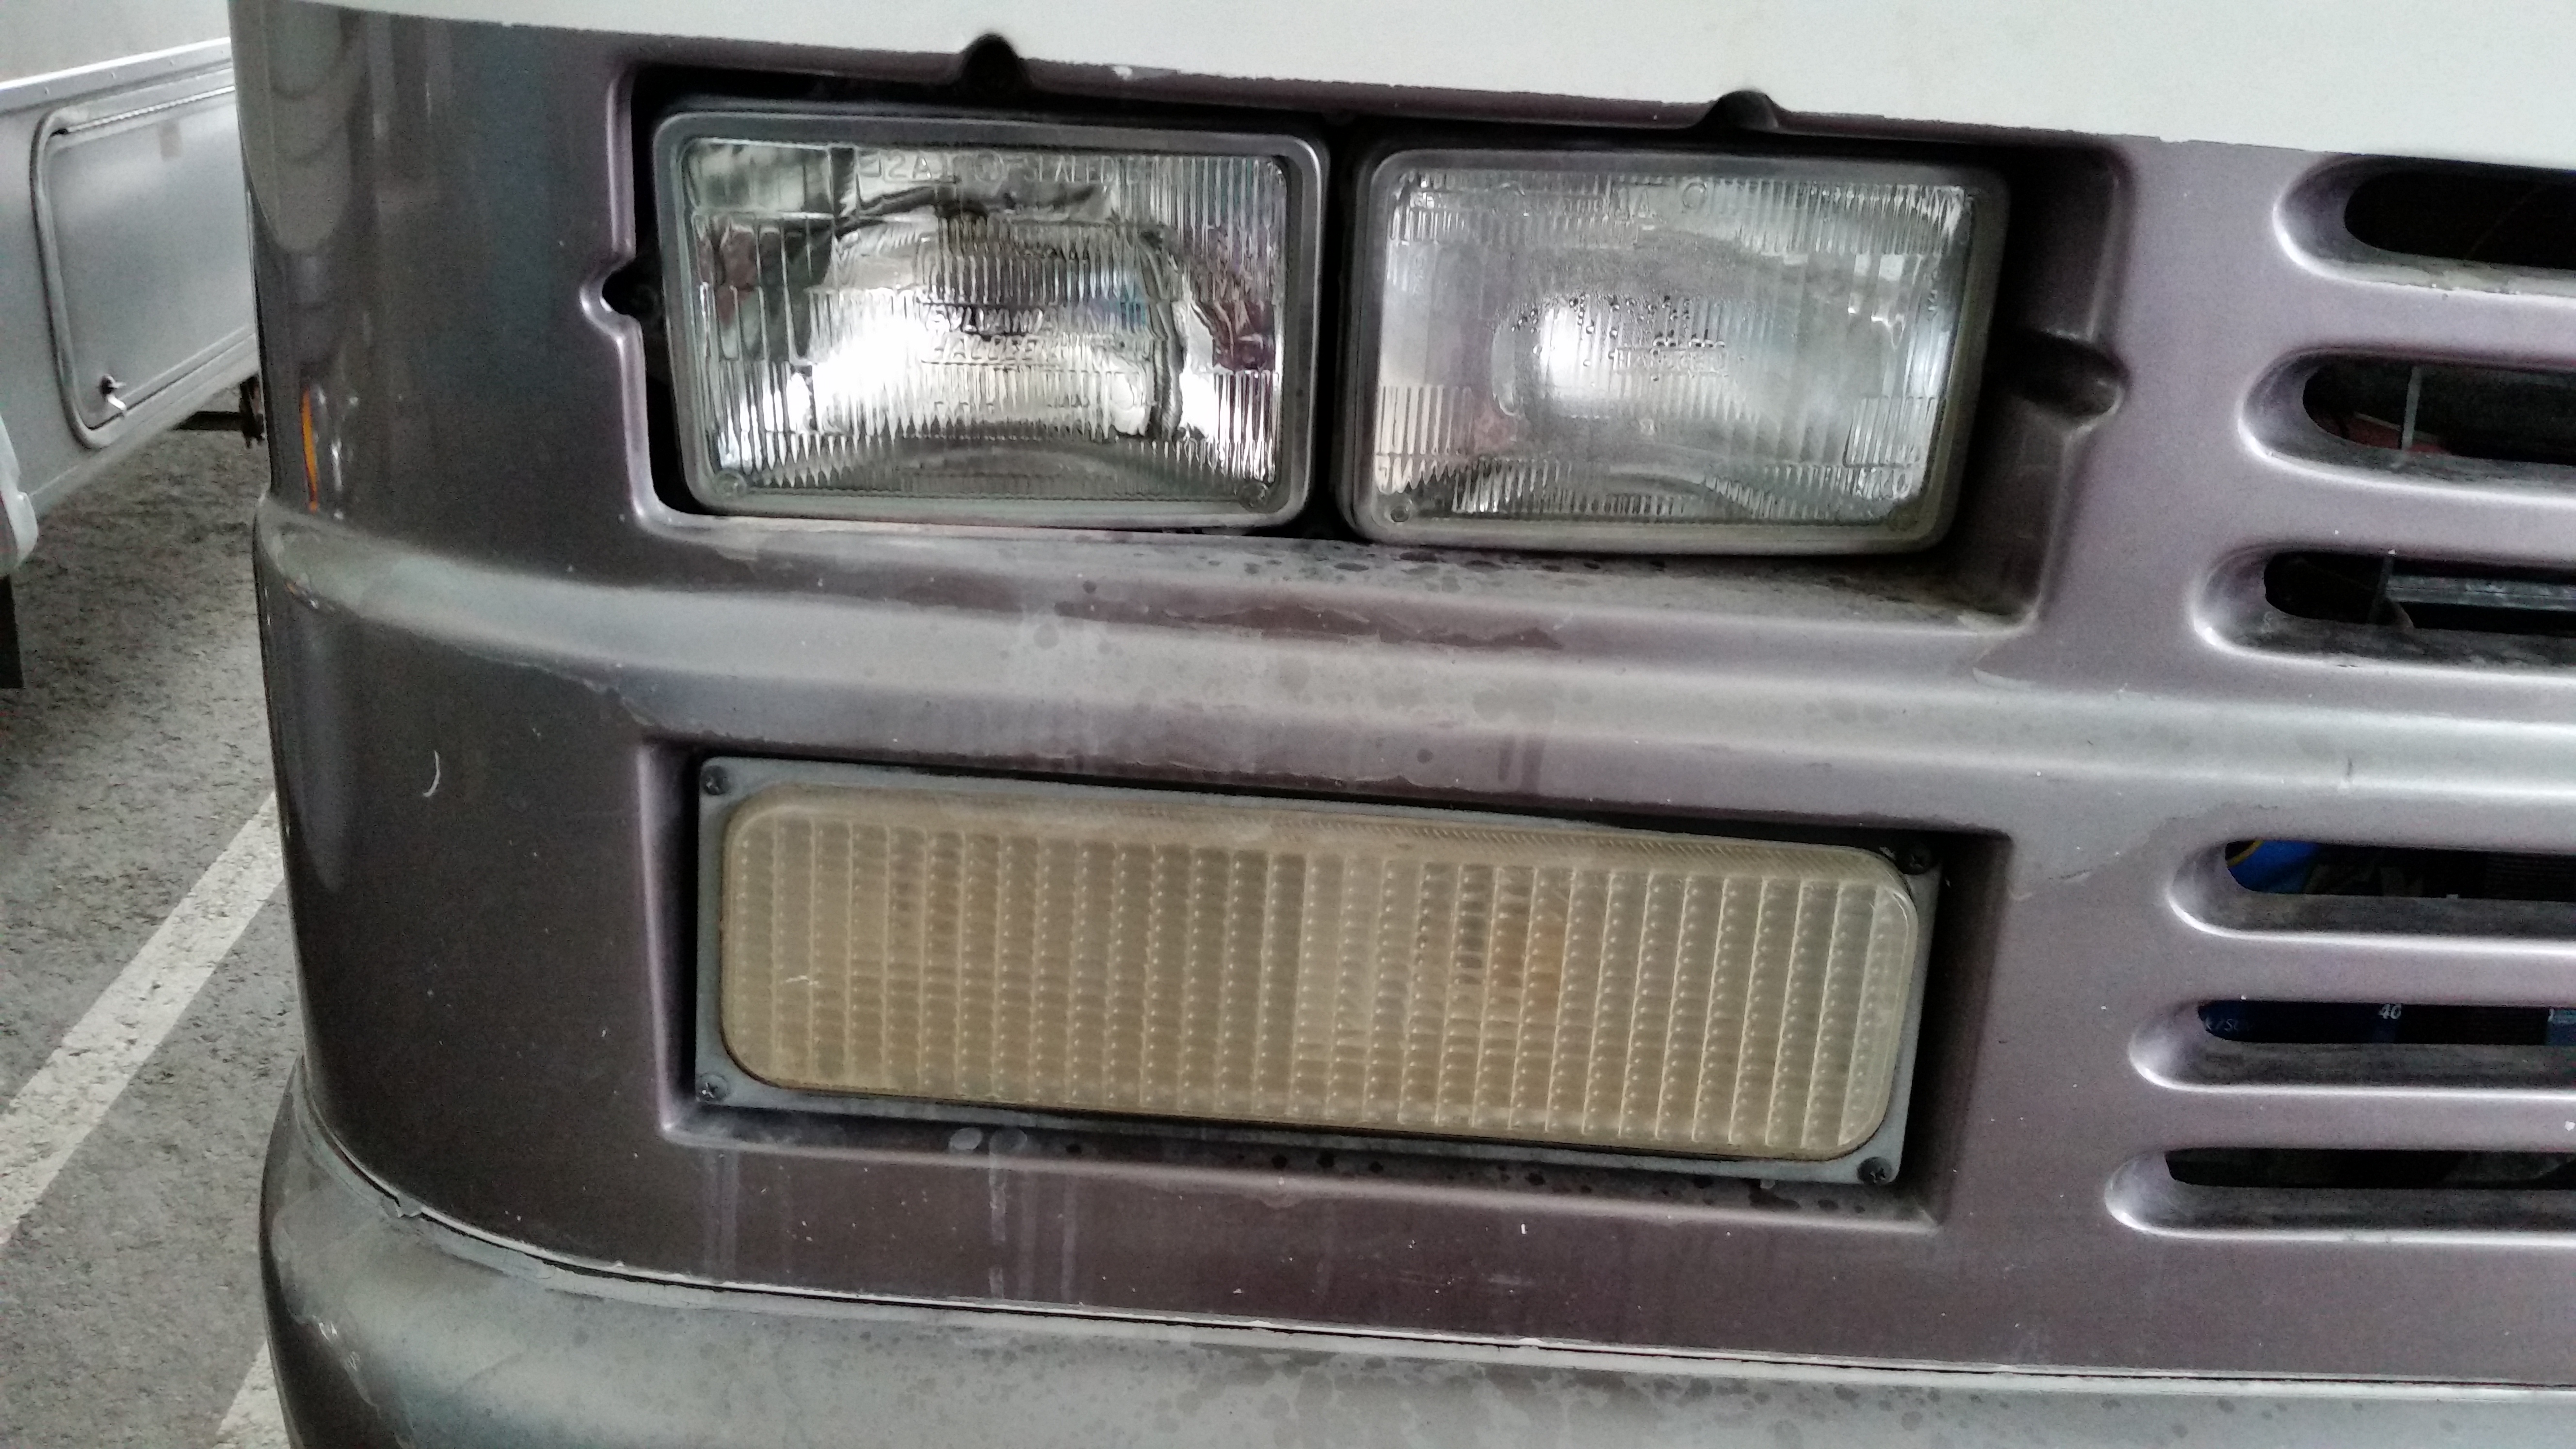 Headlamps have no housings.   Lamps moving when I drove short distance at night.